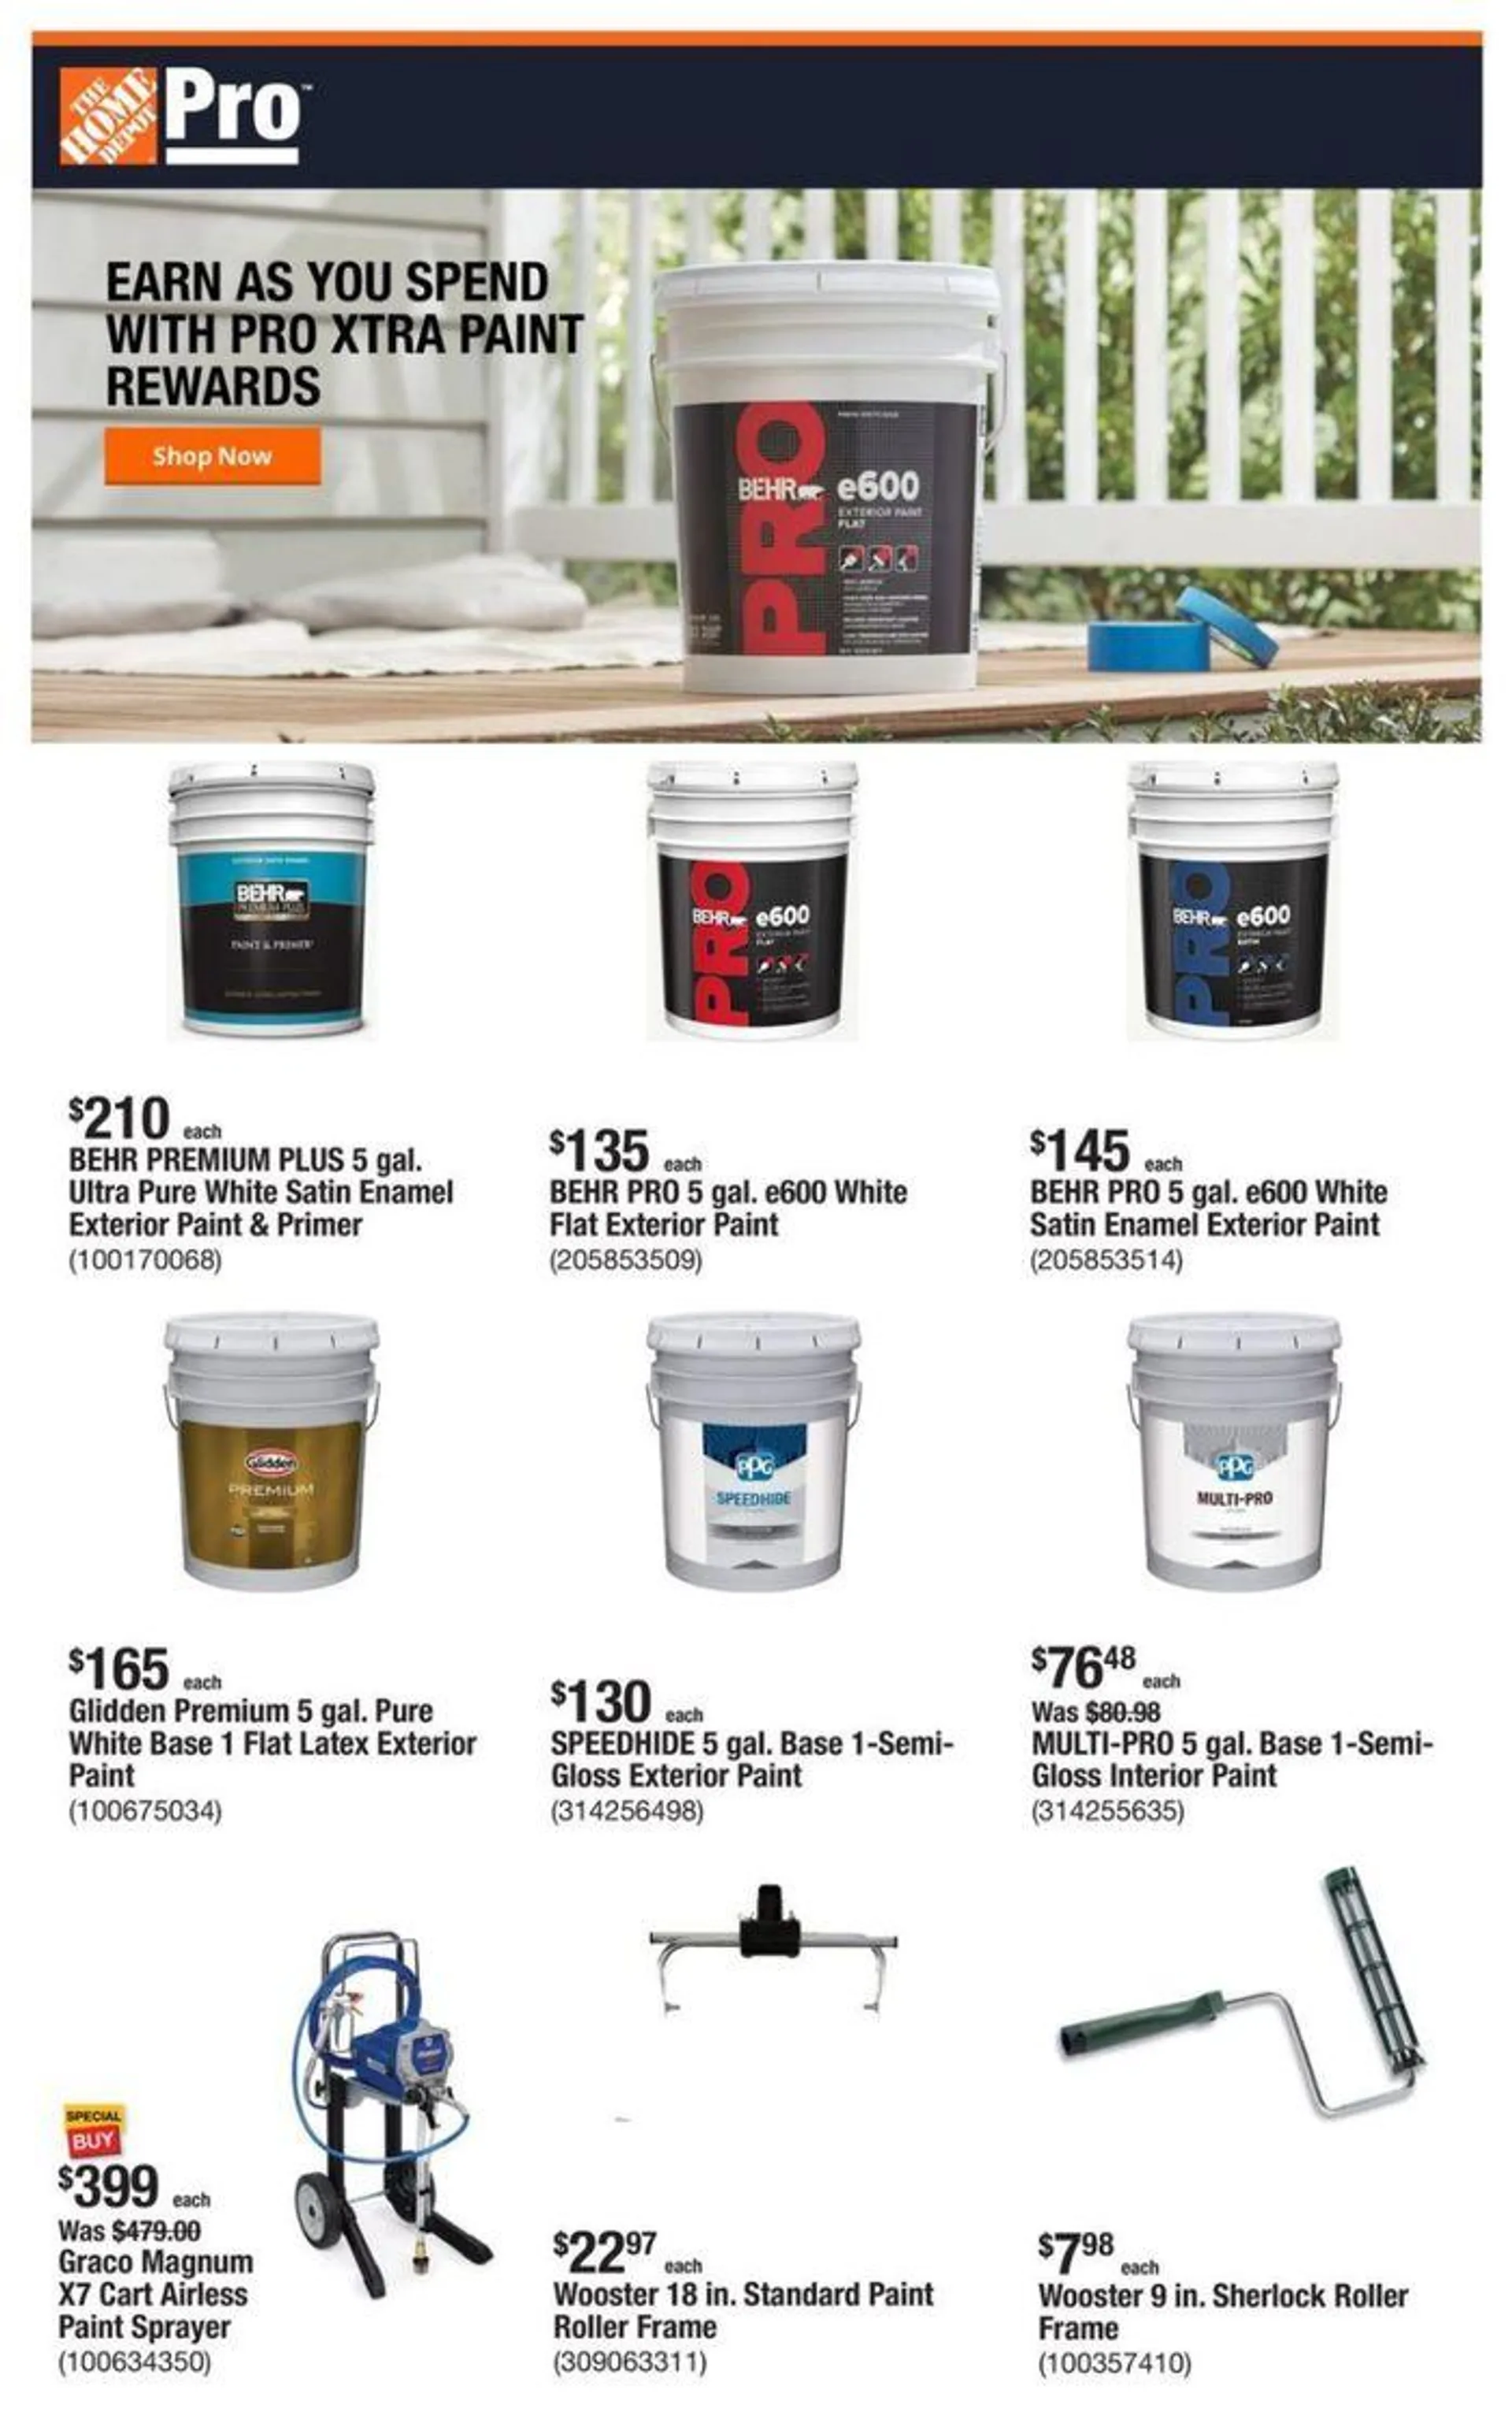 Earn As You Spend With Pro Xtra Paint Rewards - 1